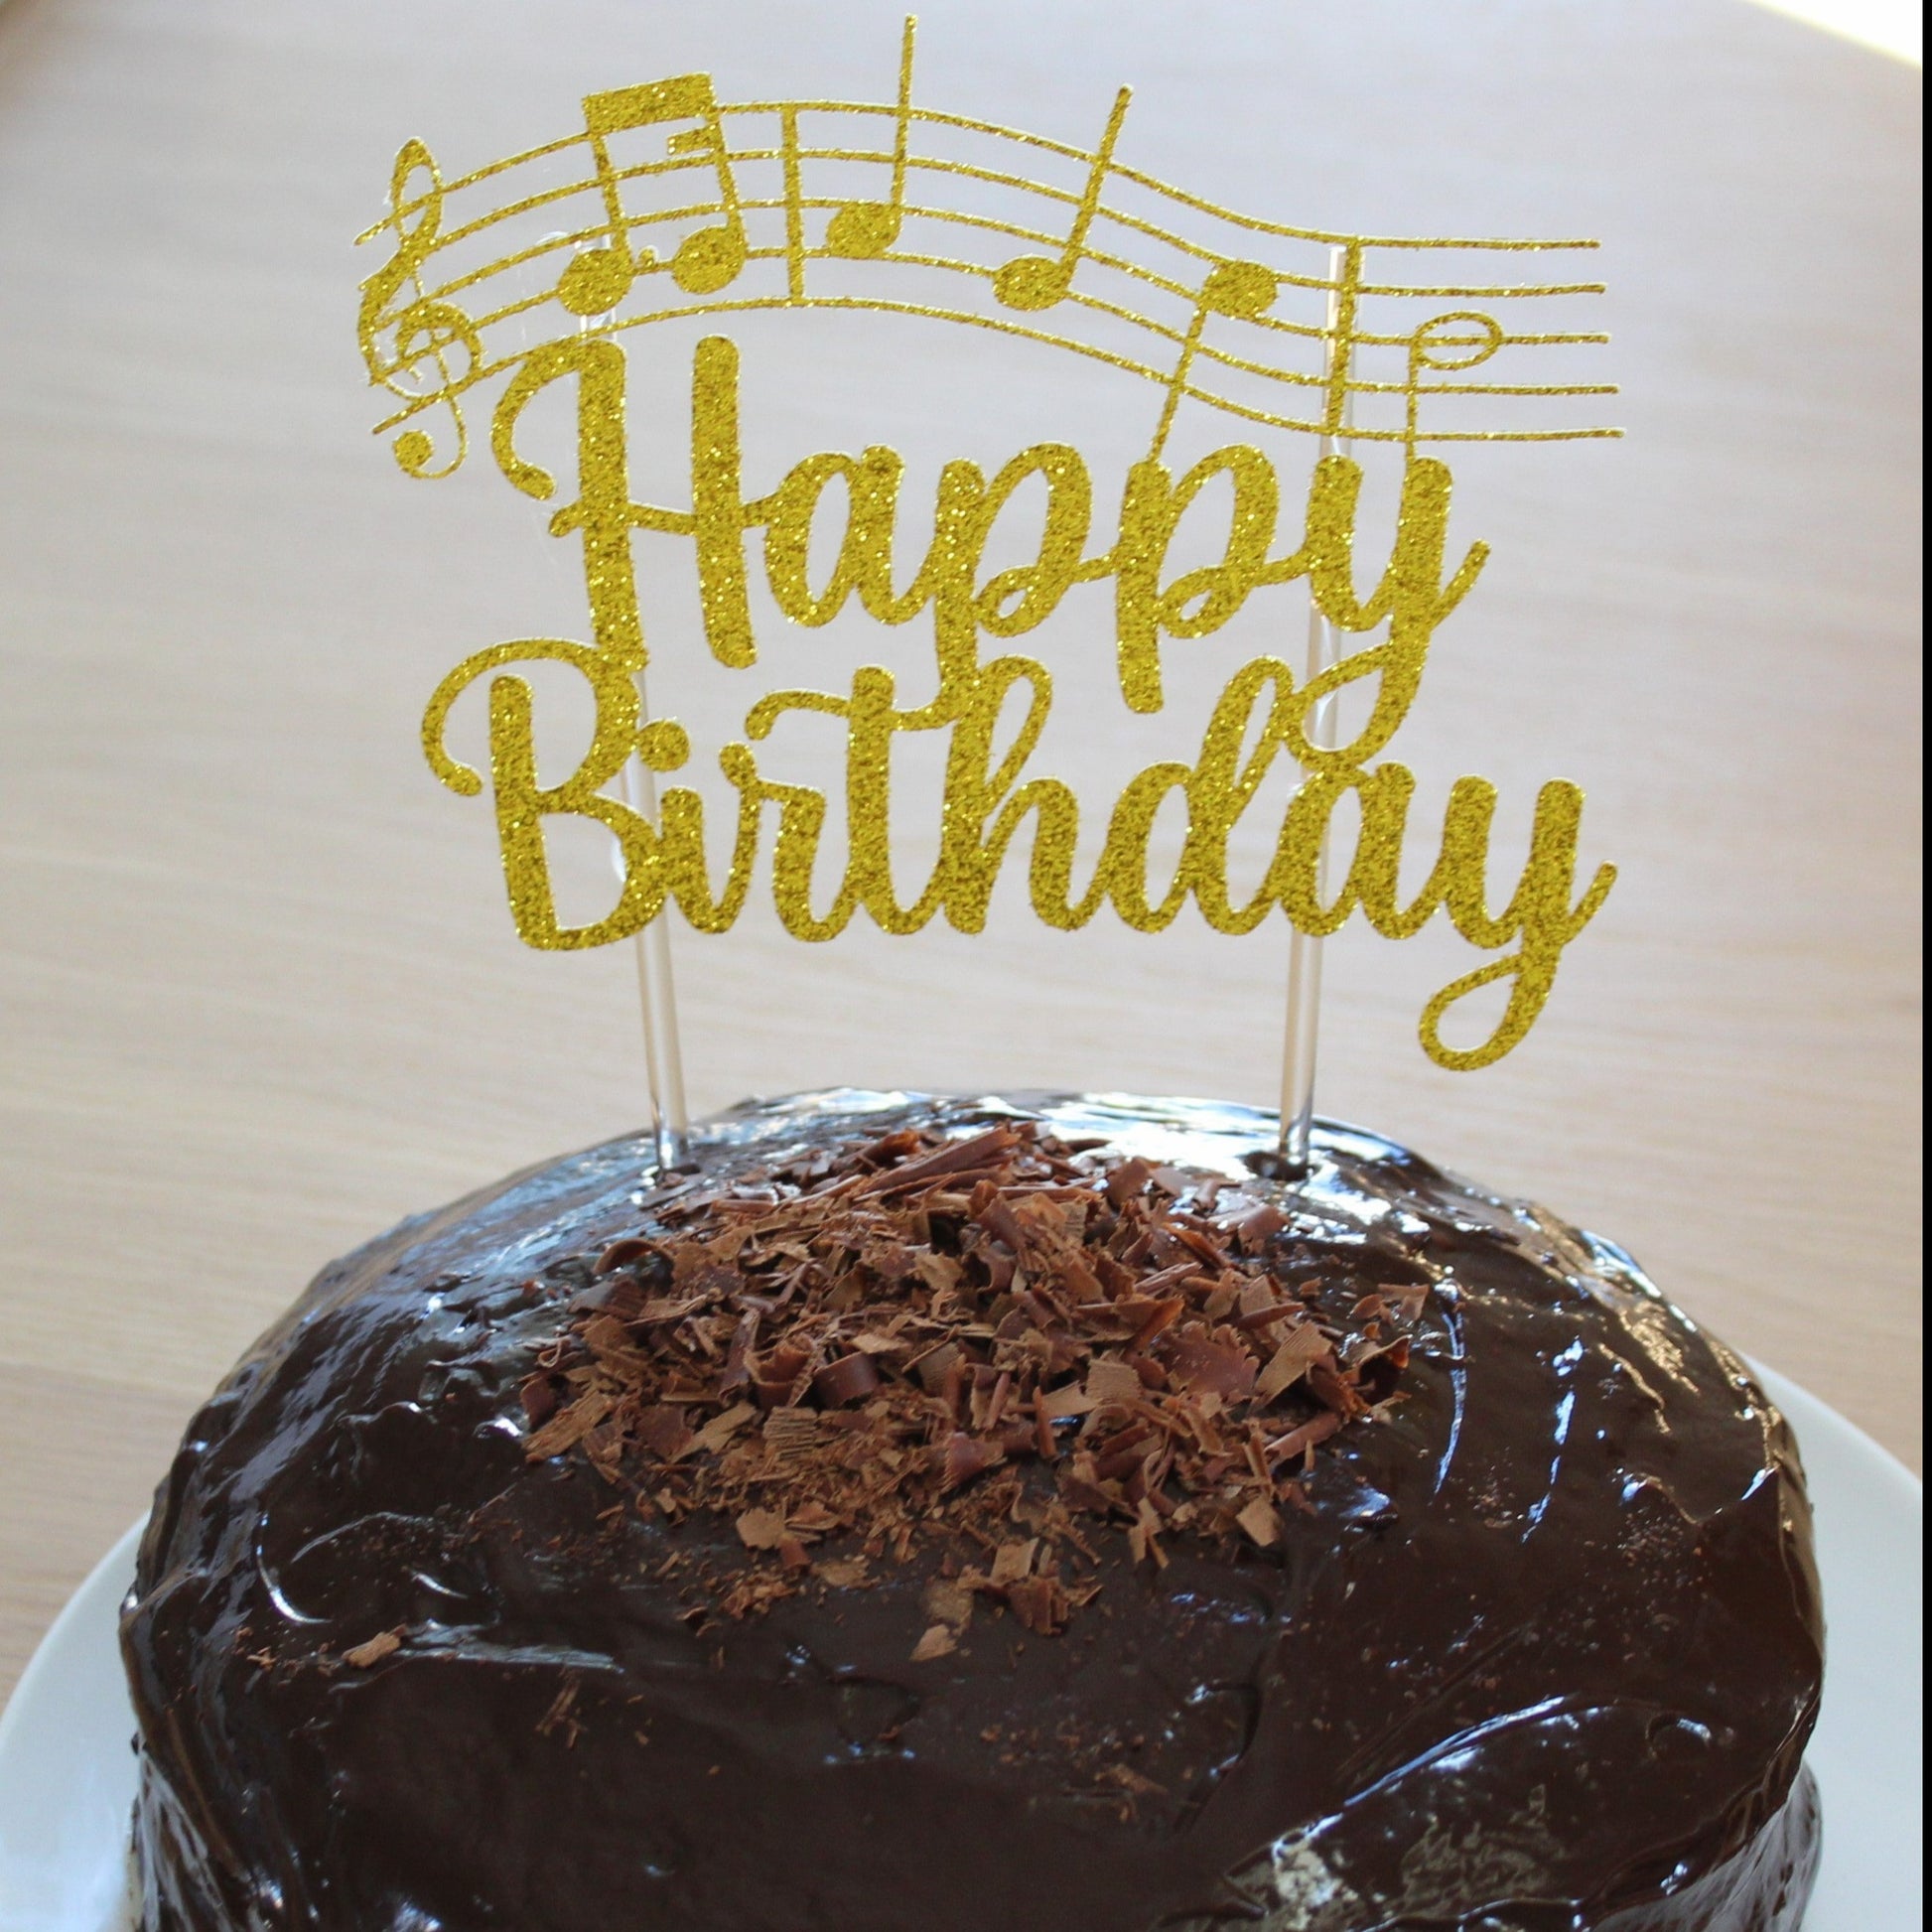 Picture of a cake with a gold glittery cake topper. Cake topper reads 'happy birthday' and shows the notes of the song 'happy birthday to you'